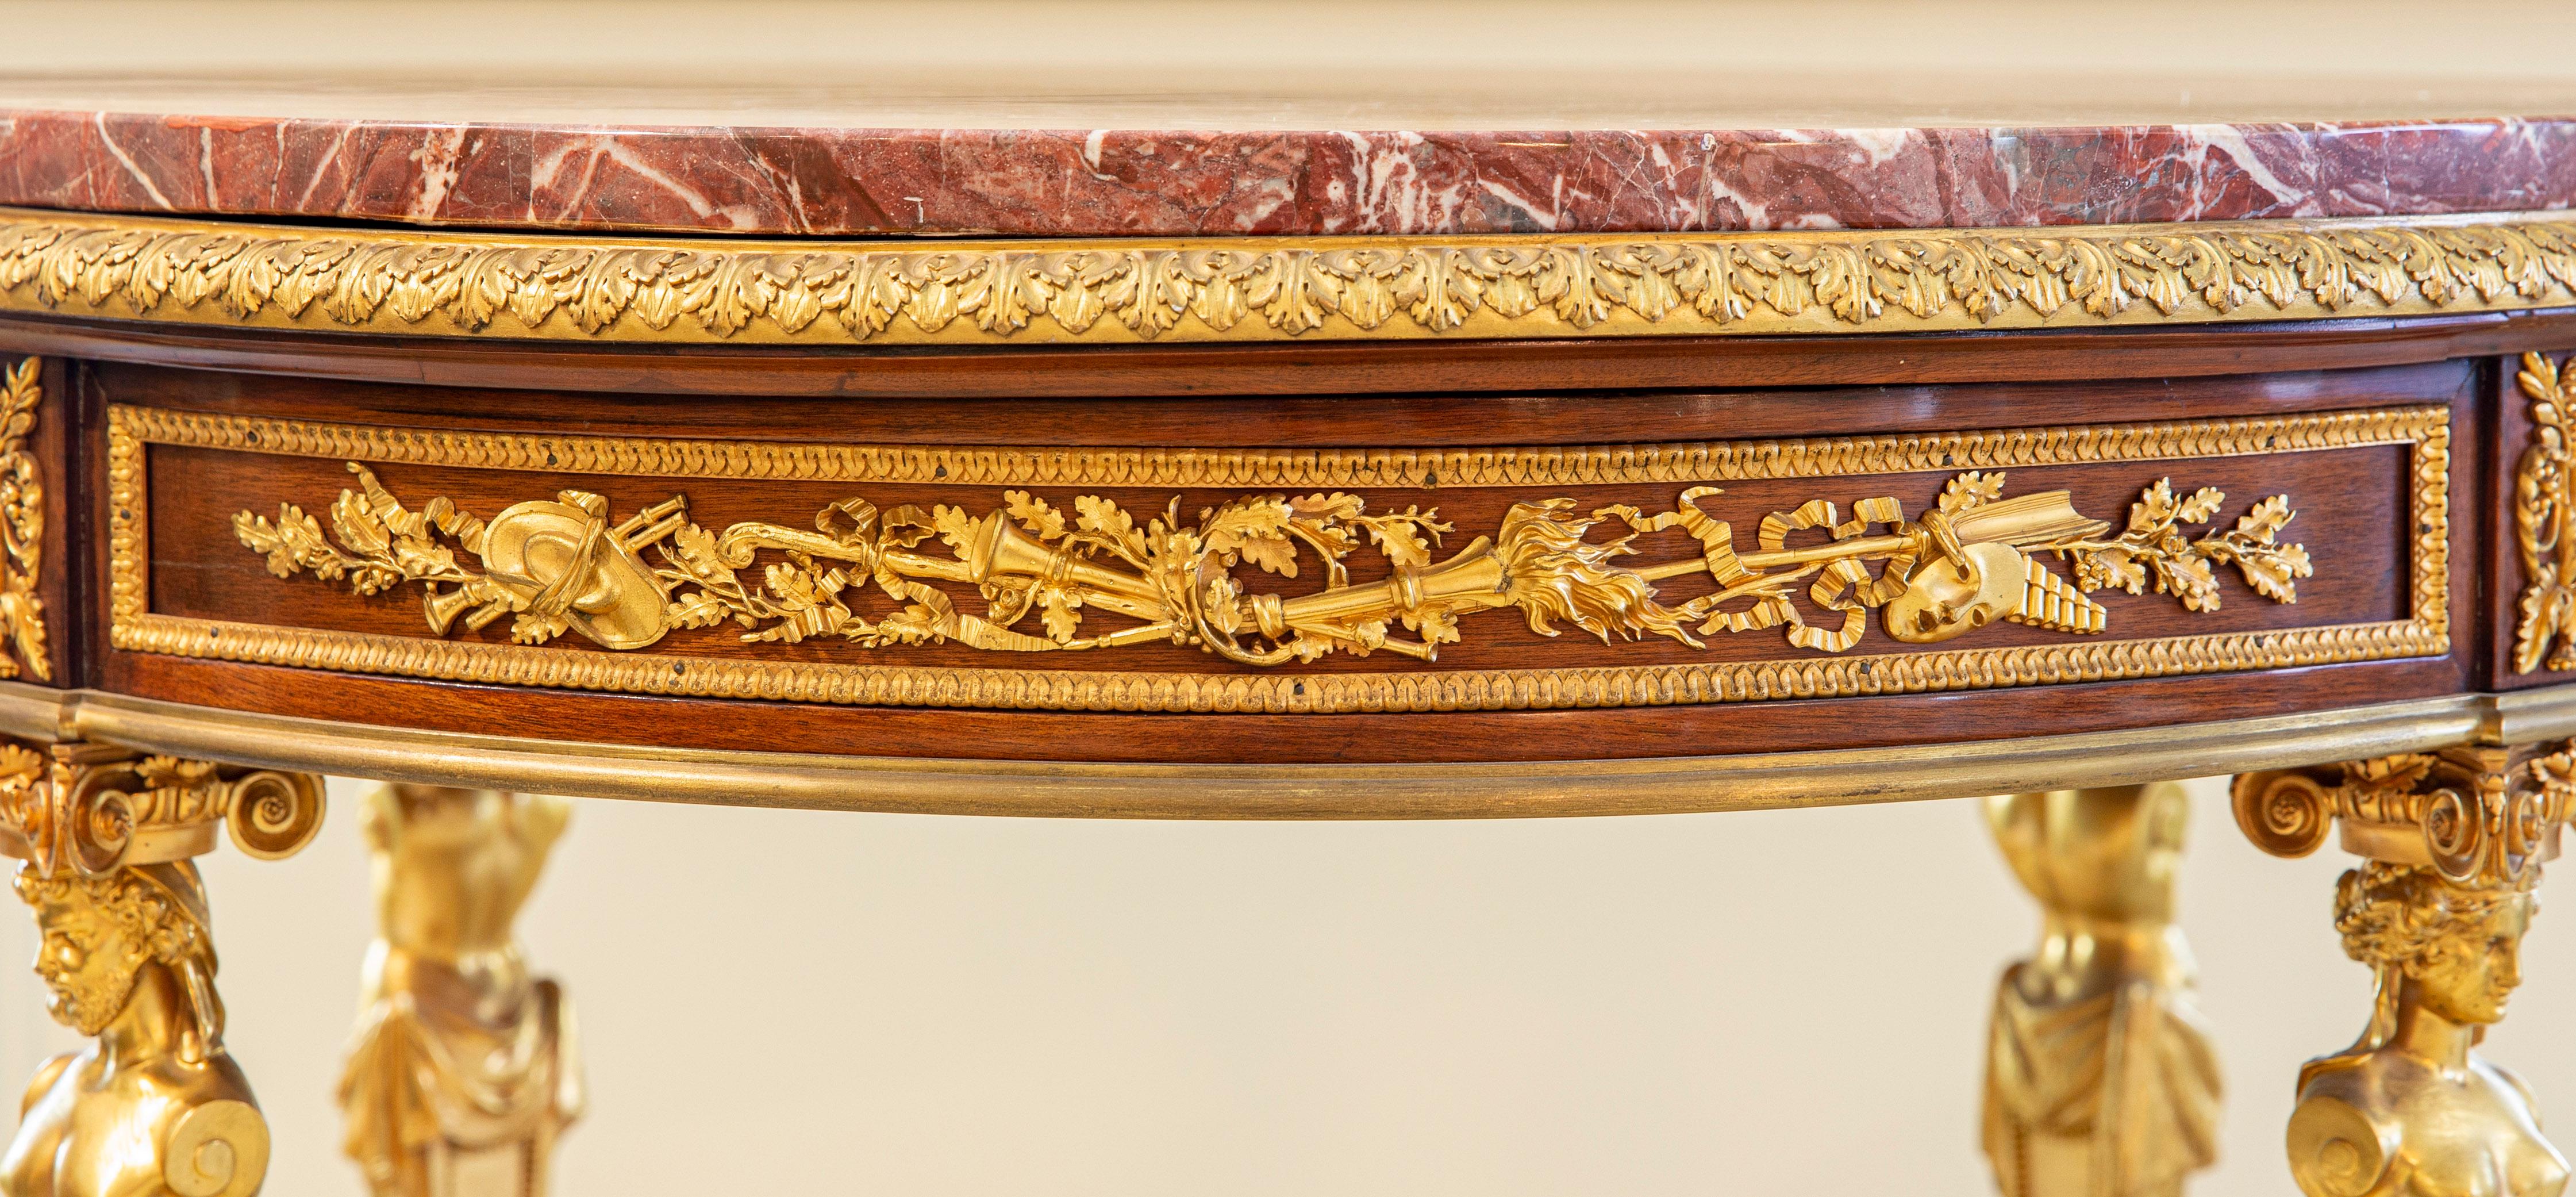 A Very Fine Late 19th Century Gilt Bronze Mounted Center Table by Henry Dasson For Sale 3